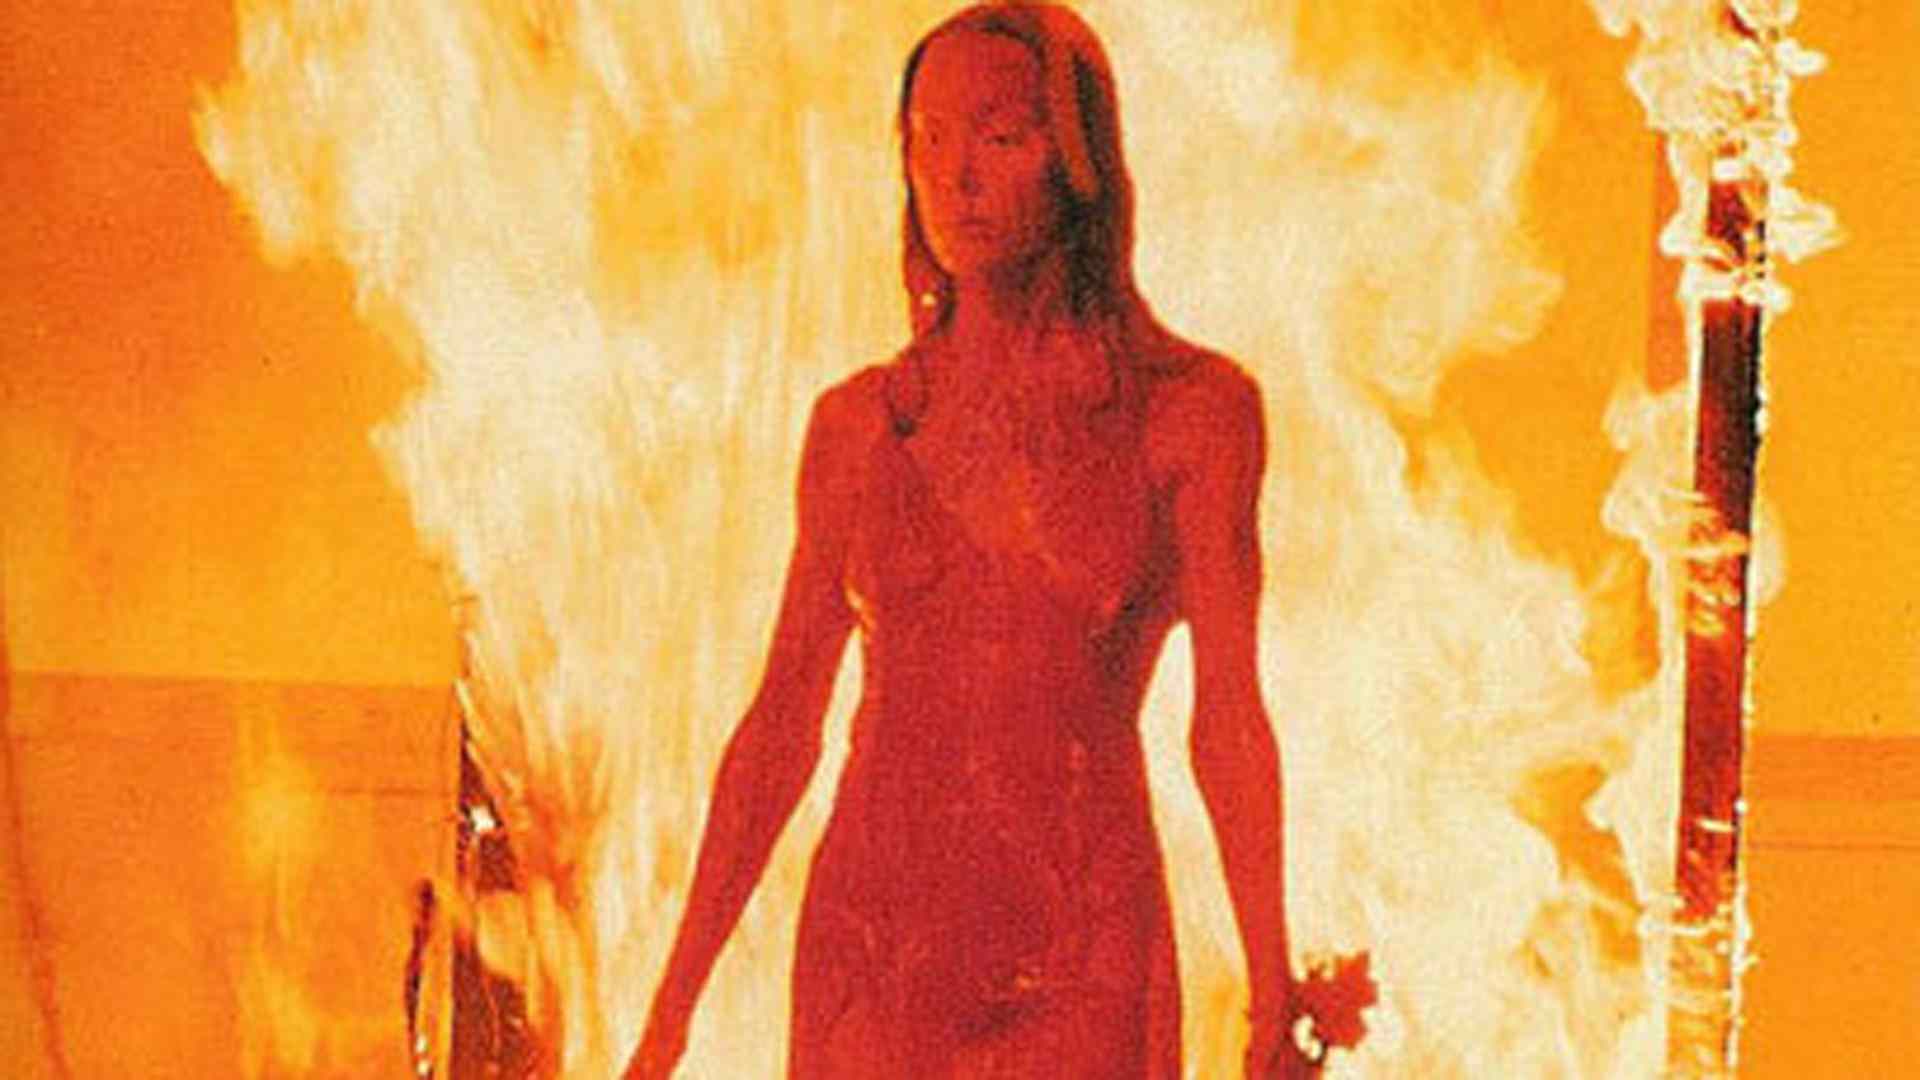 Sissy Spacek who plays Carrie in this hit Stephen King novel and Brian De Palma directed movie.